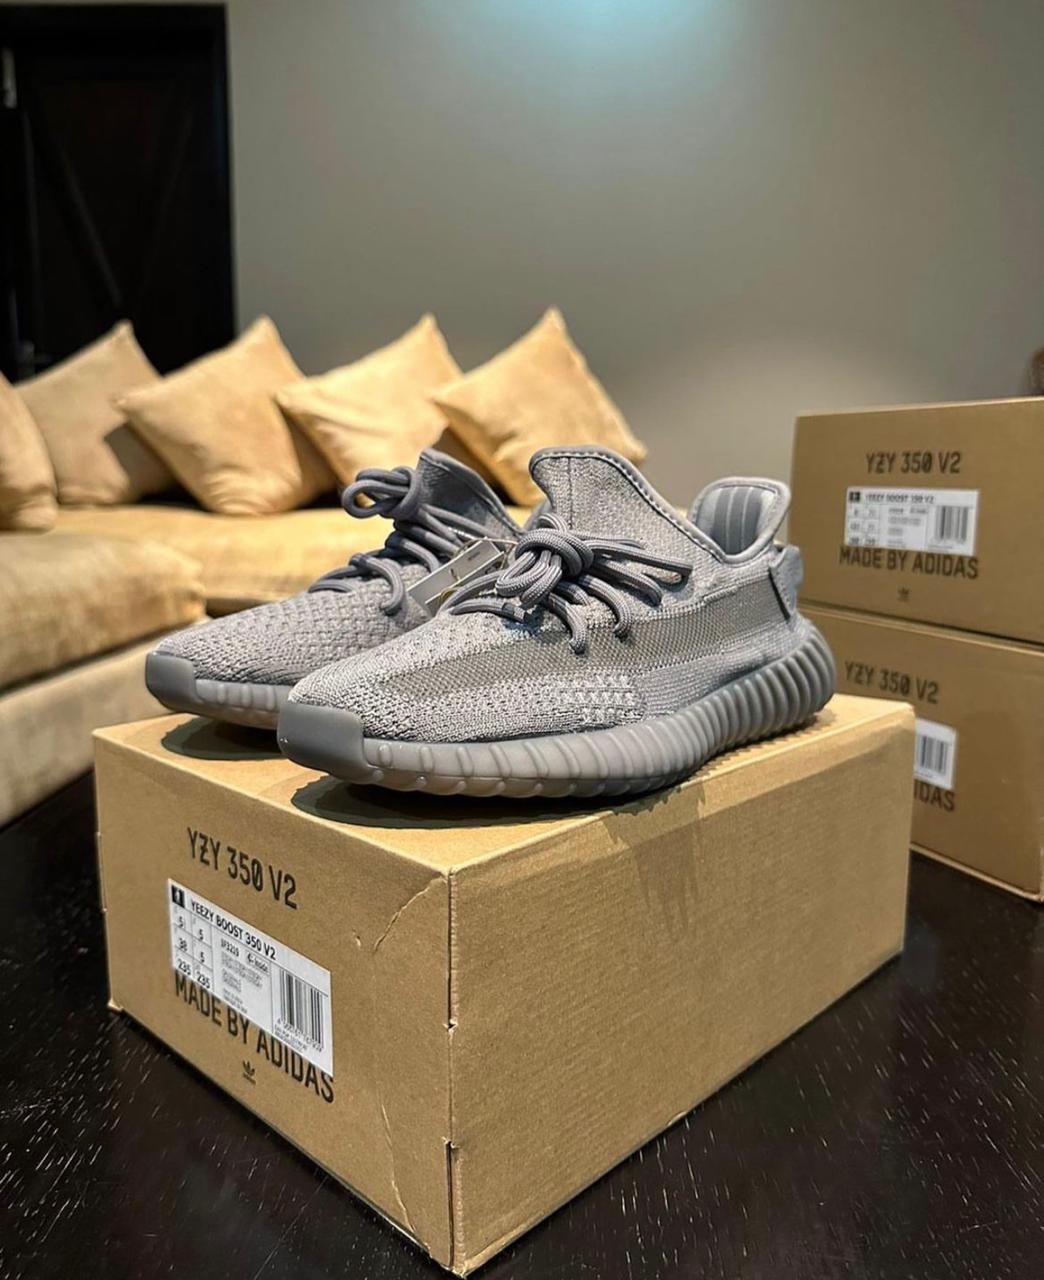 Adidas Yeezy Boost 350 V2 Space Ash